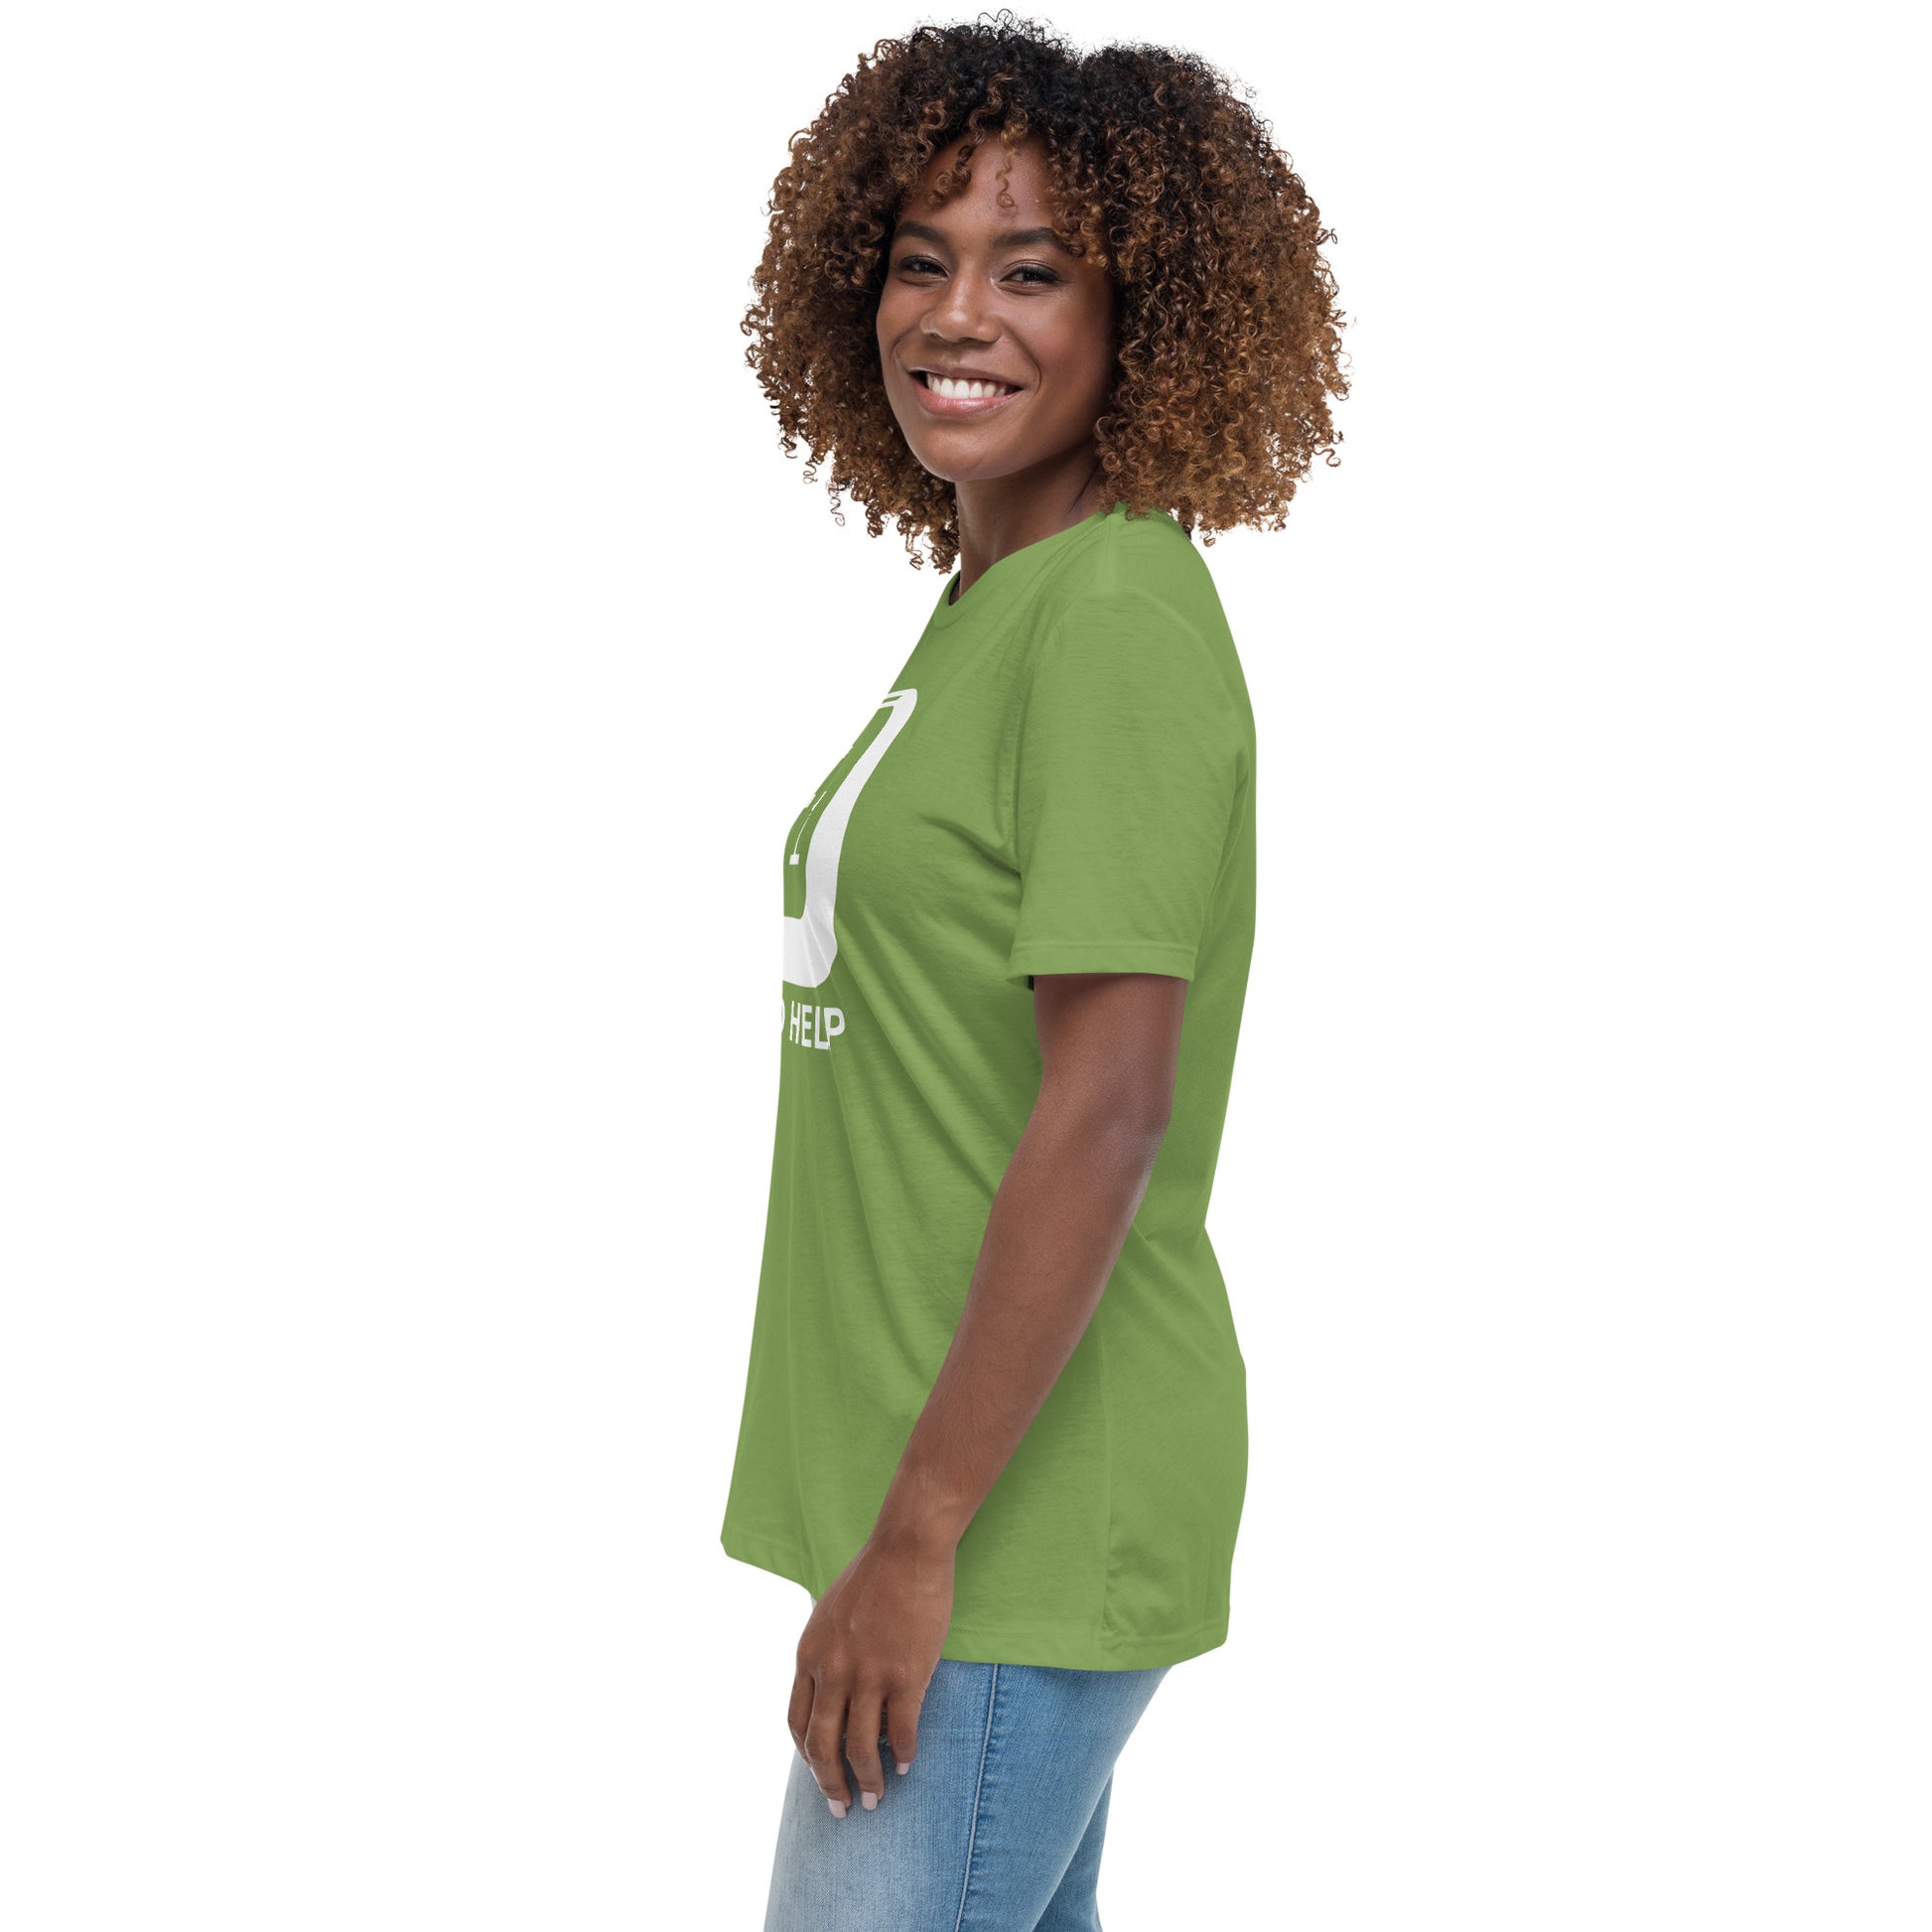 Woman with leaf green  t-shirt with picture of "F1" key and text "I need help"